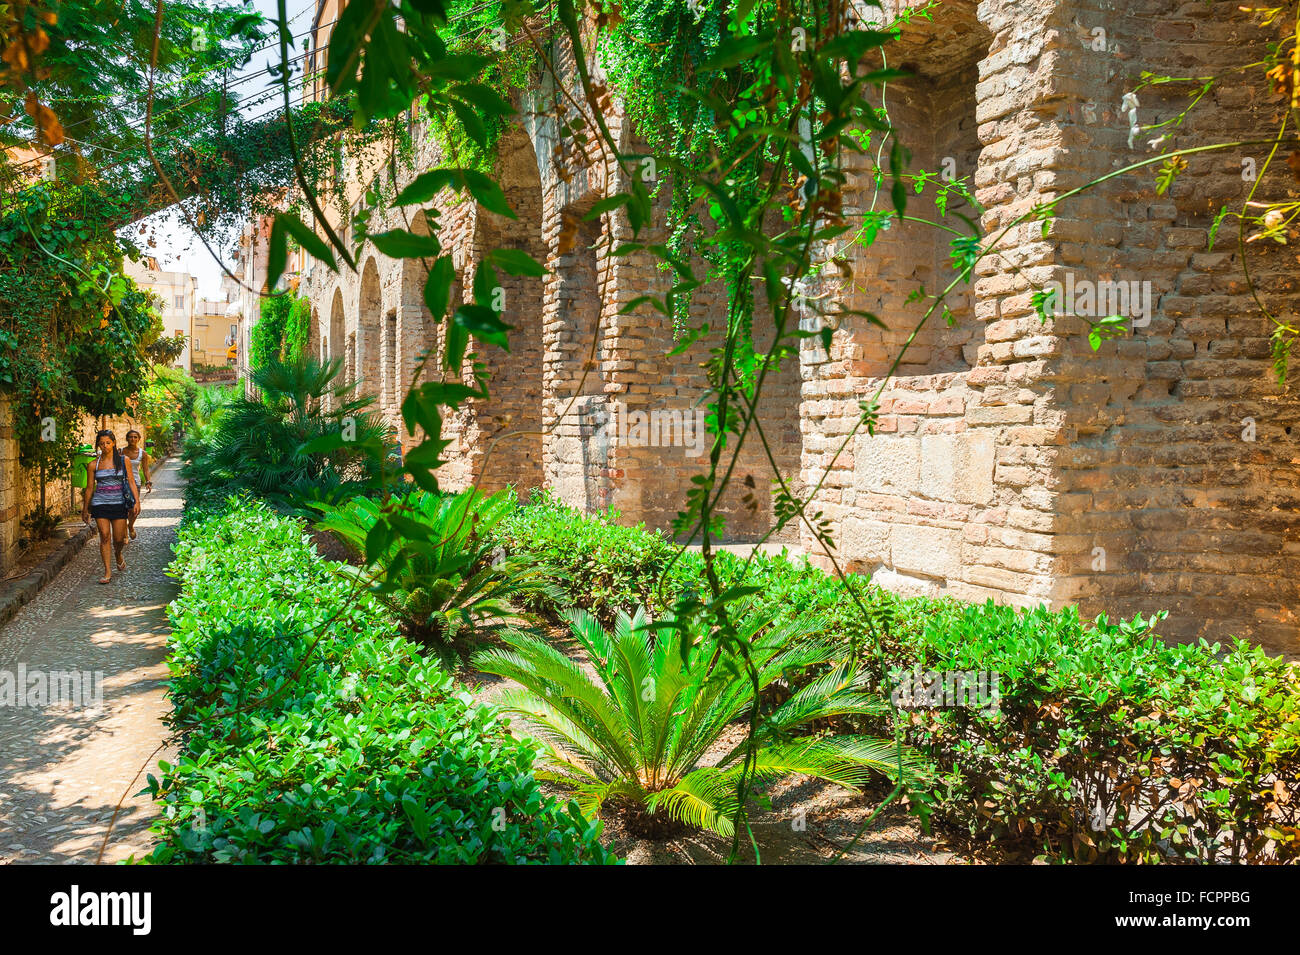 Roman wall italy, view of the Naumachie in Taormina, an ancient Roman wall that once supported a massive cistern supplying water to the town. Stock Photo